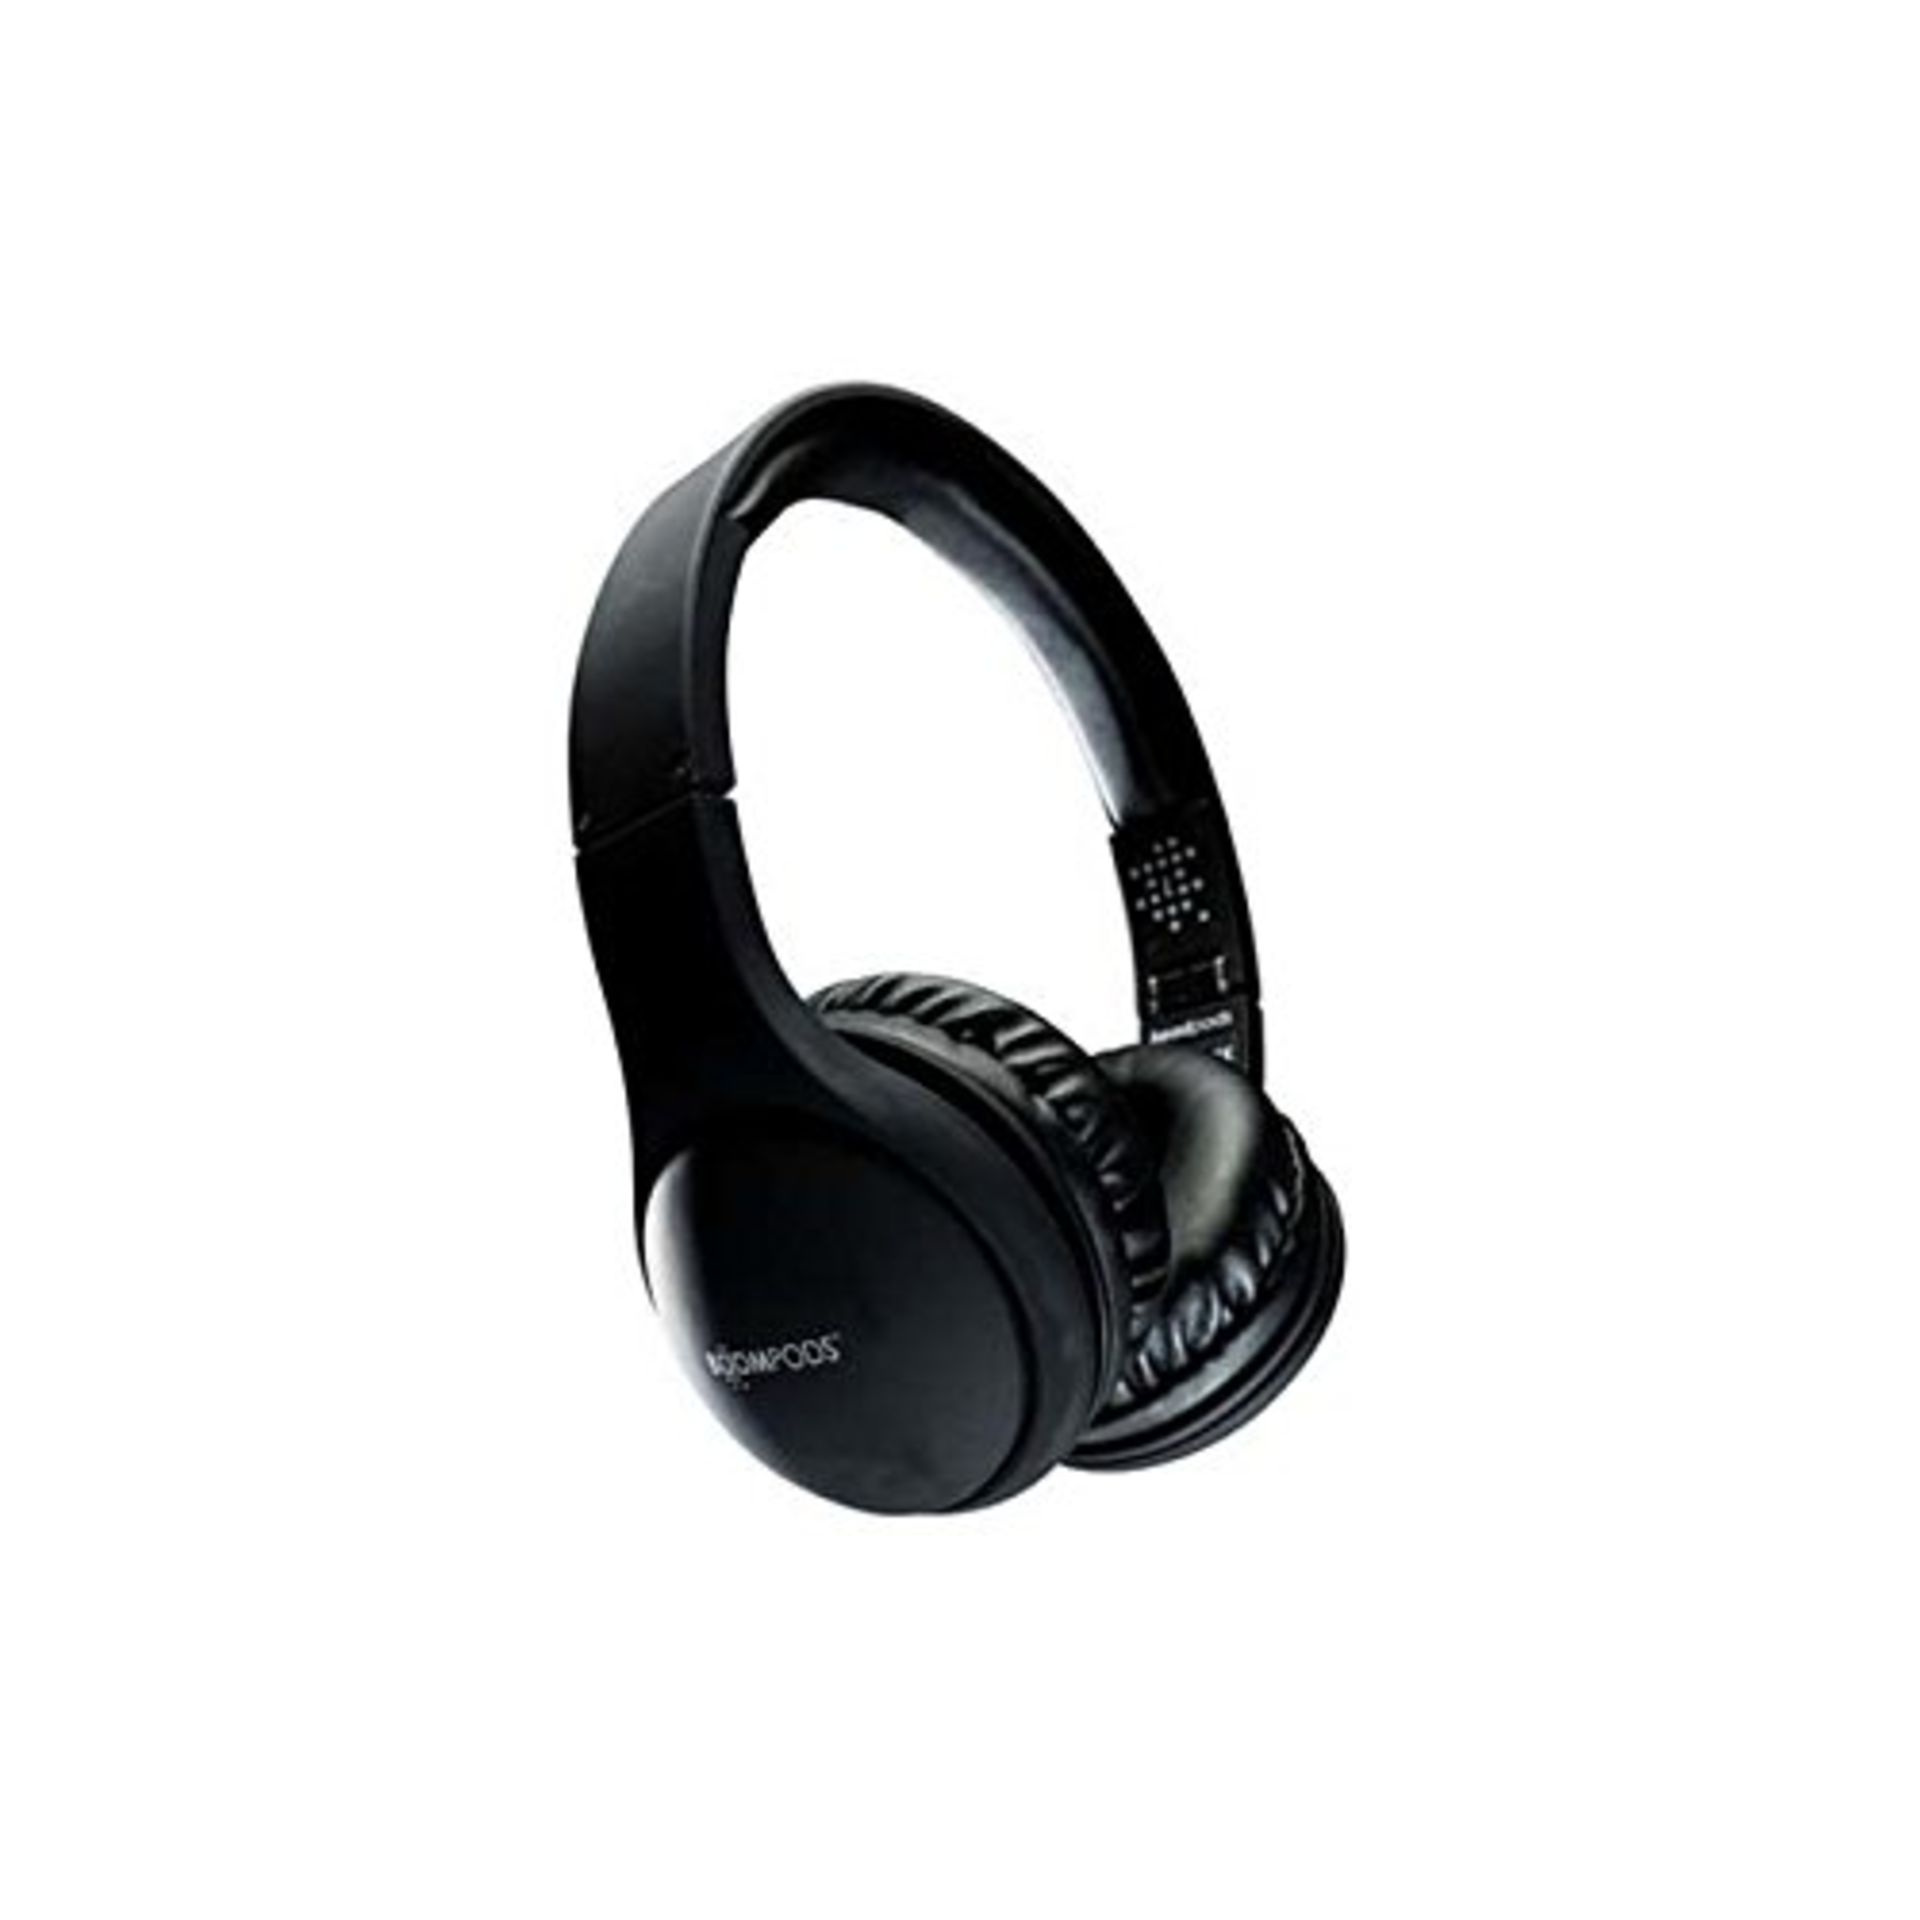 + VAT Brand New Headpods Folding Stereo Headphones With Remote And Mic And Travel Case RRP: 39.99